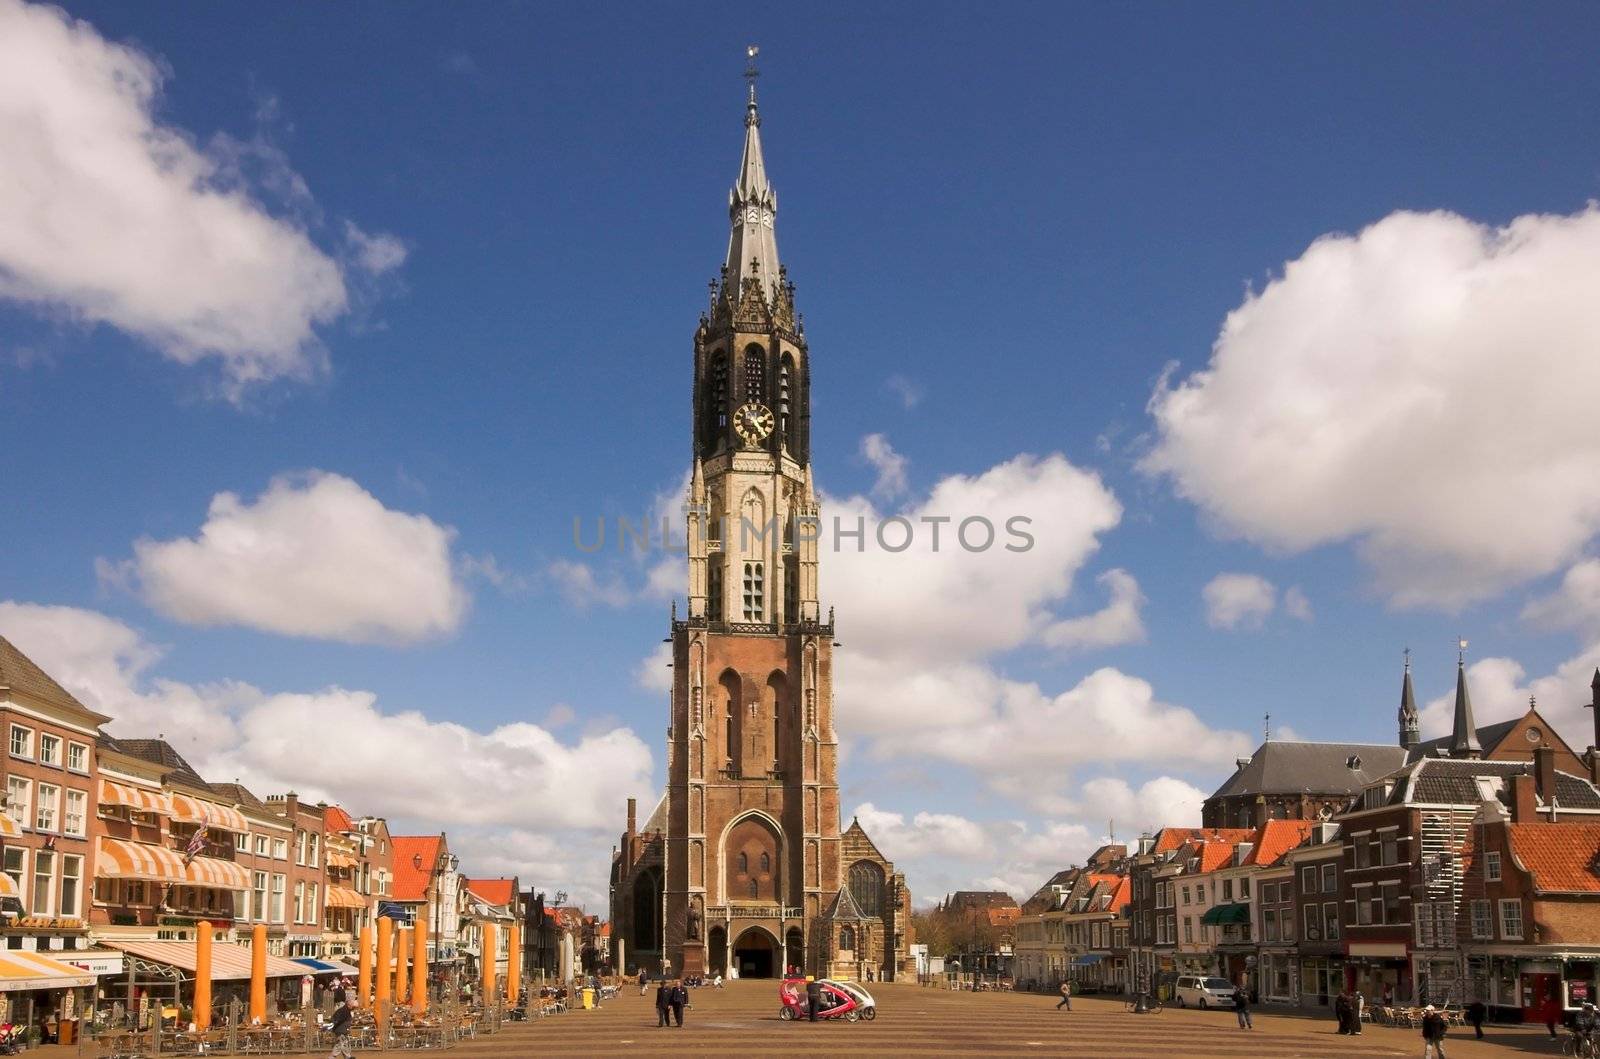 Nieuwe Kerk cathedral in Delft, panorama of the main square